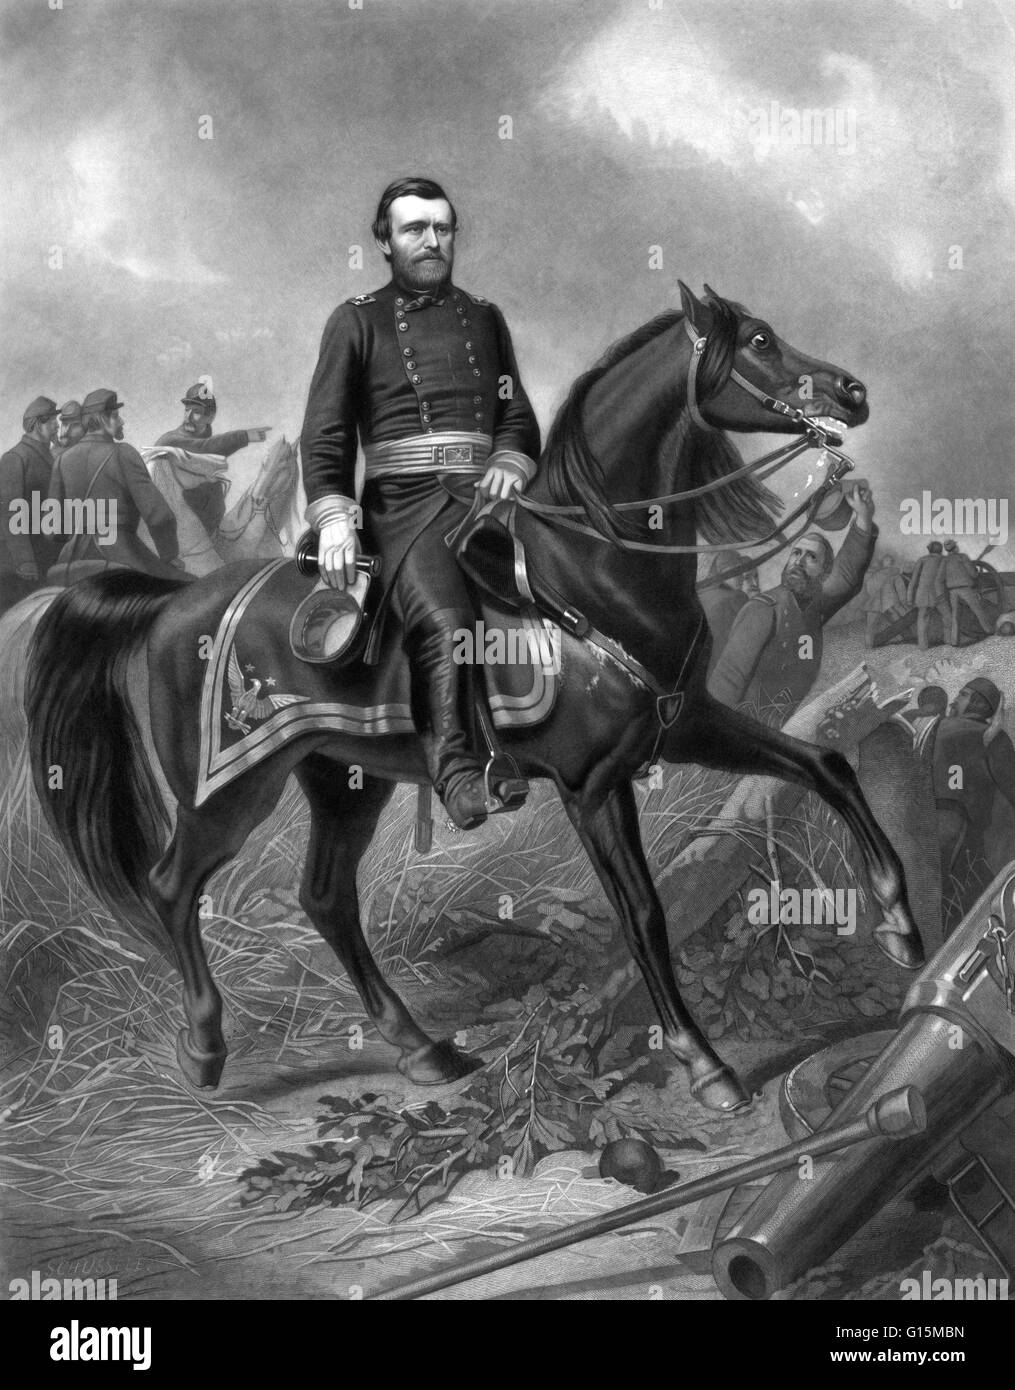 Engraving showing Grant, full-length portrait, wearing military uniform, sitting on horseback, facing right. Ulysses S. Grant (born Hiram Ulysses Grant; April 27, 1822 - July 23, 1885) was the 18th President of the United States. A career soldier, he grad Stock Photo